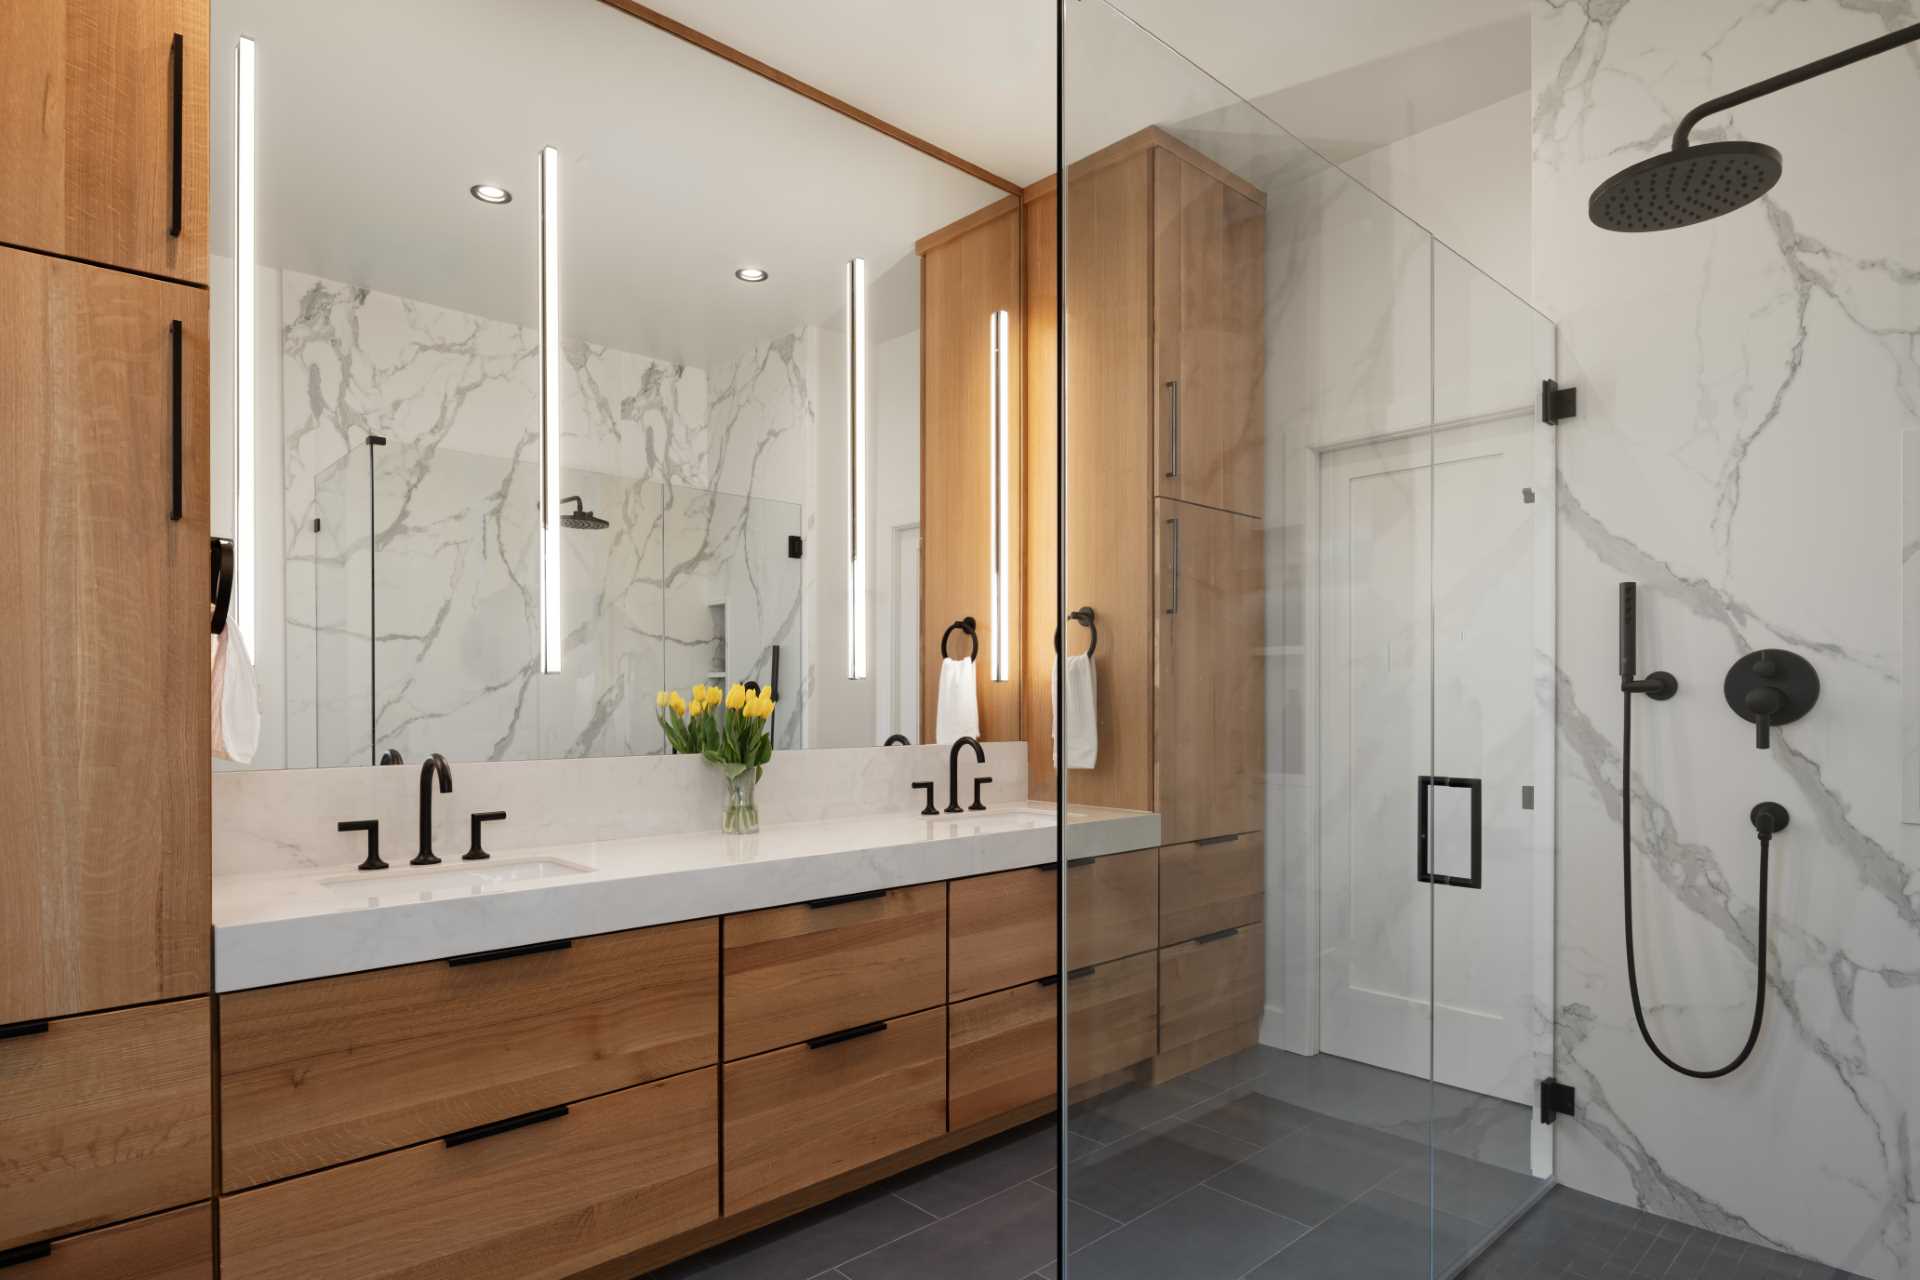 In this modern en-suite bathroom, there's a double vanity with plenty of storage and a walk-in shower with a pair of shelving niches.